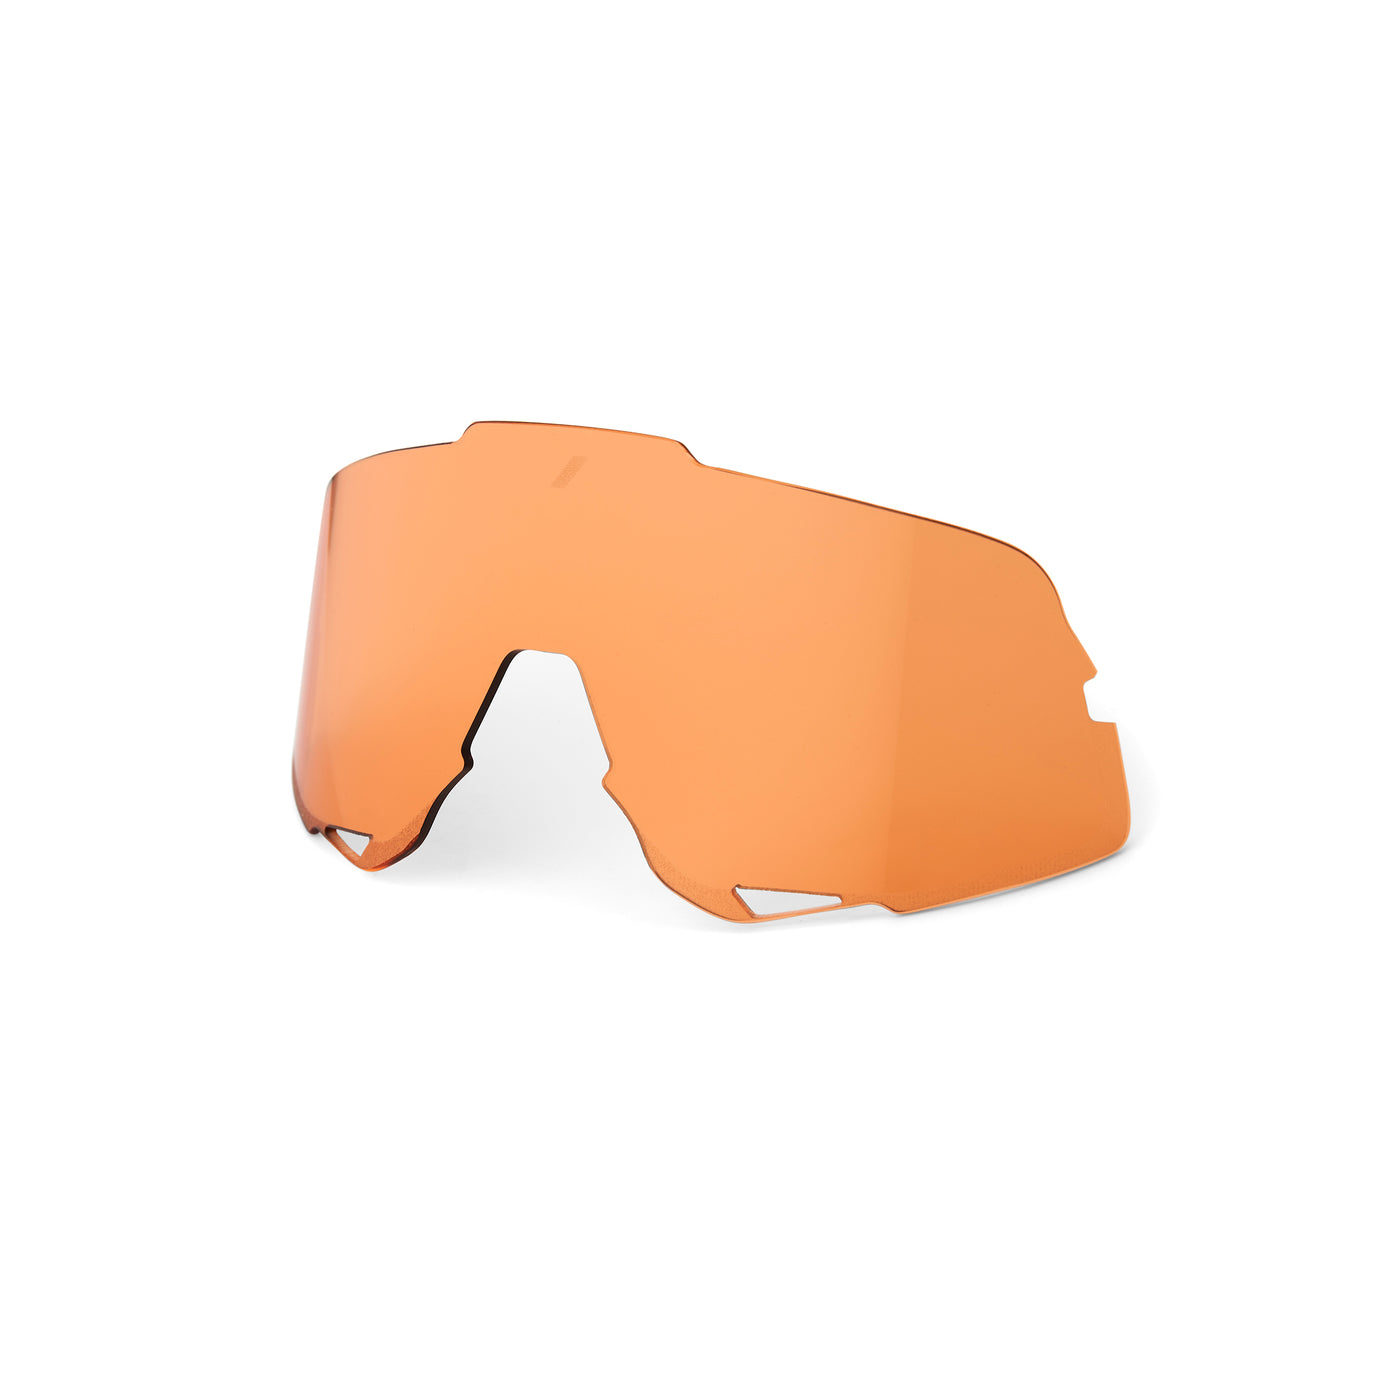 GLENDALE Replacement Lens - Persimmon